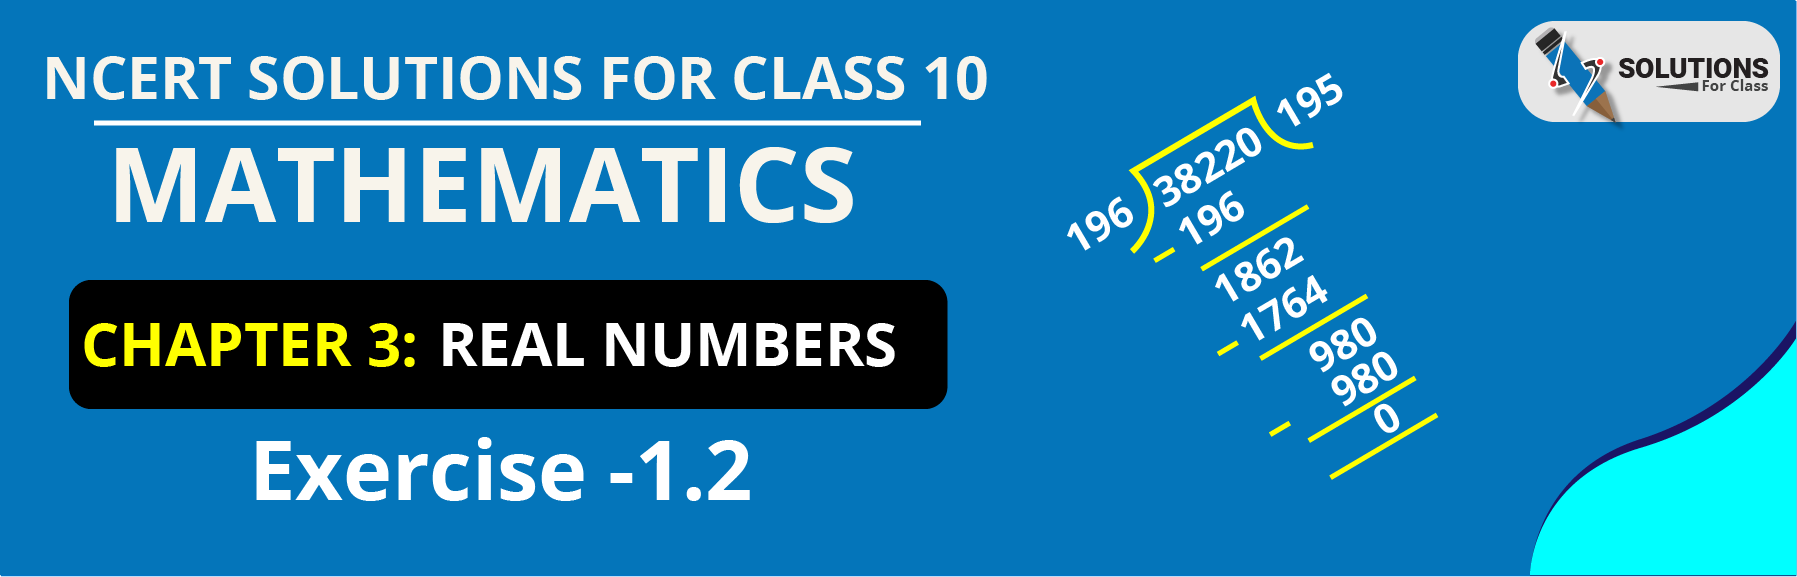 NCERT Solutions For Class 10, Maths, Chapter 1, Real Numbers, Exercise 1.2